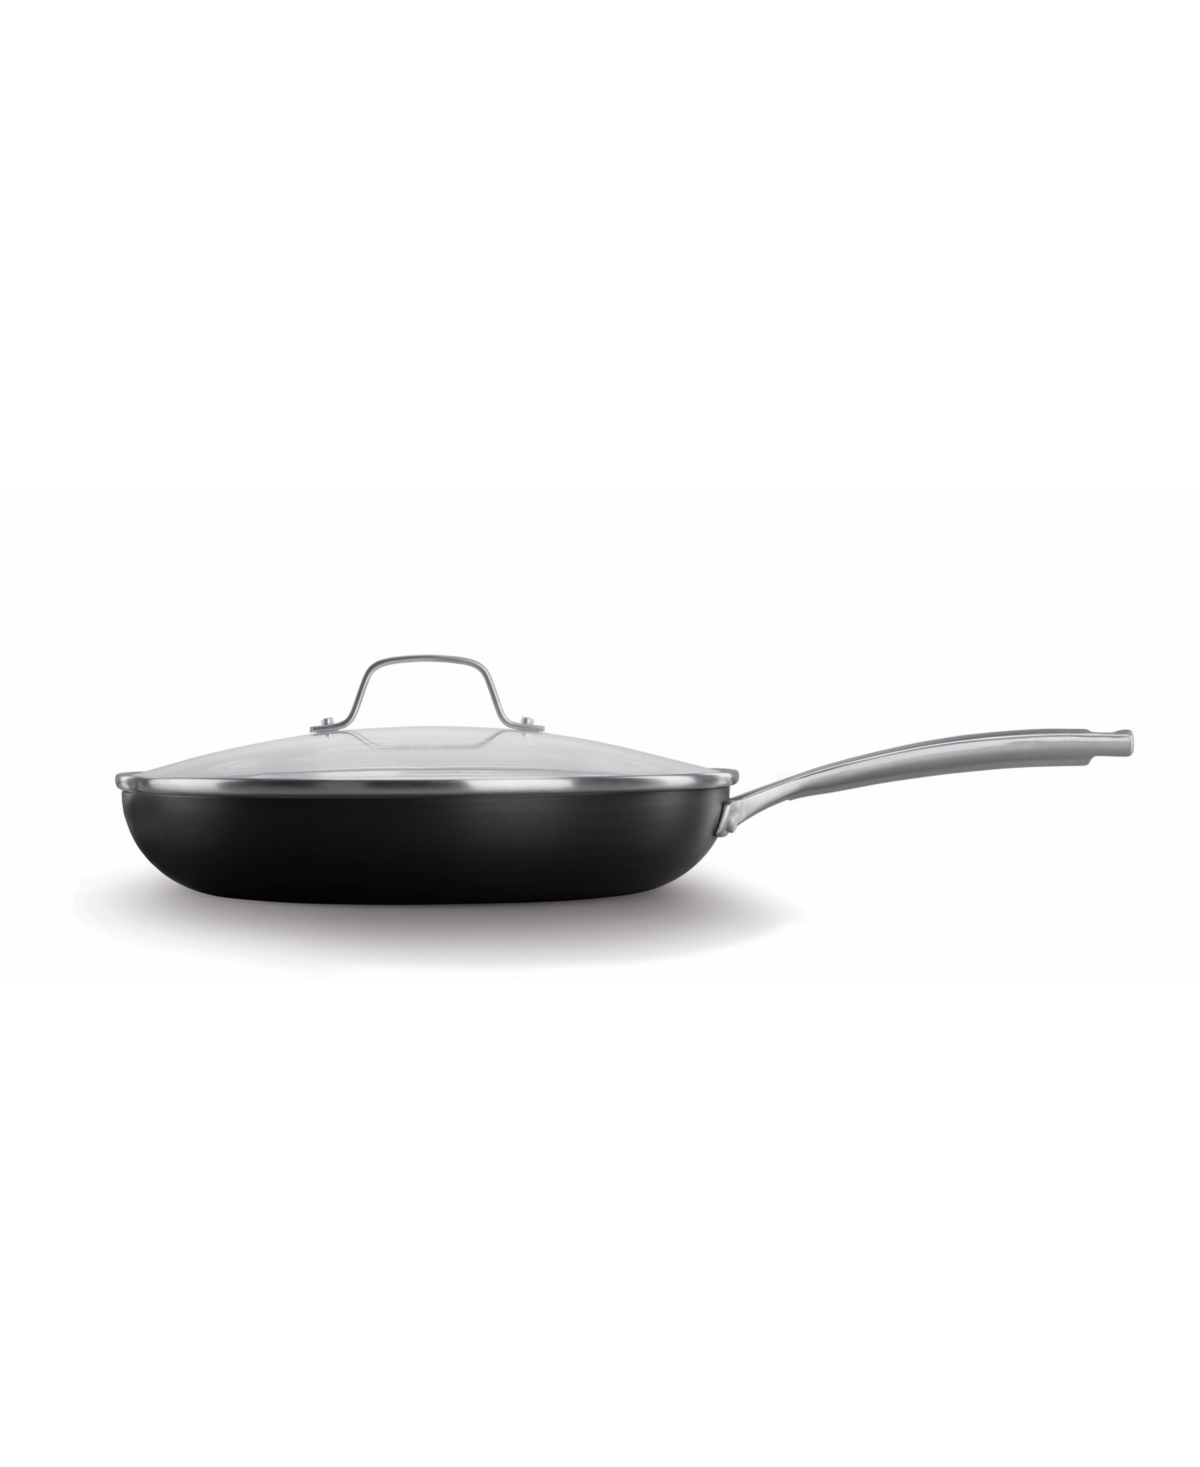 Calphalon Classic Oil Infused Ceramic 12" Fry Pan With Cover In Black